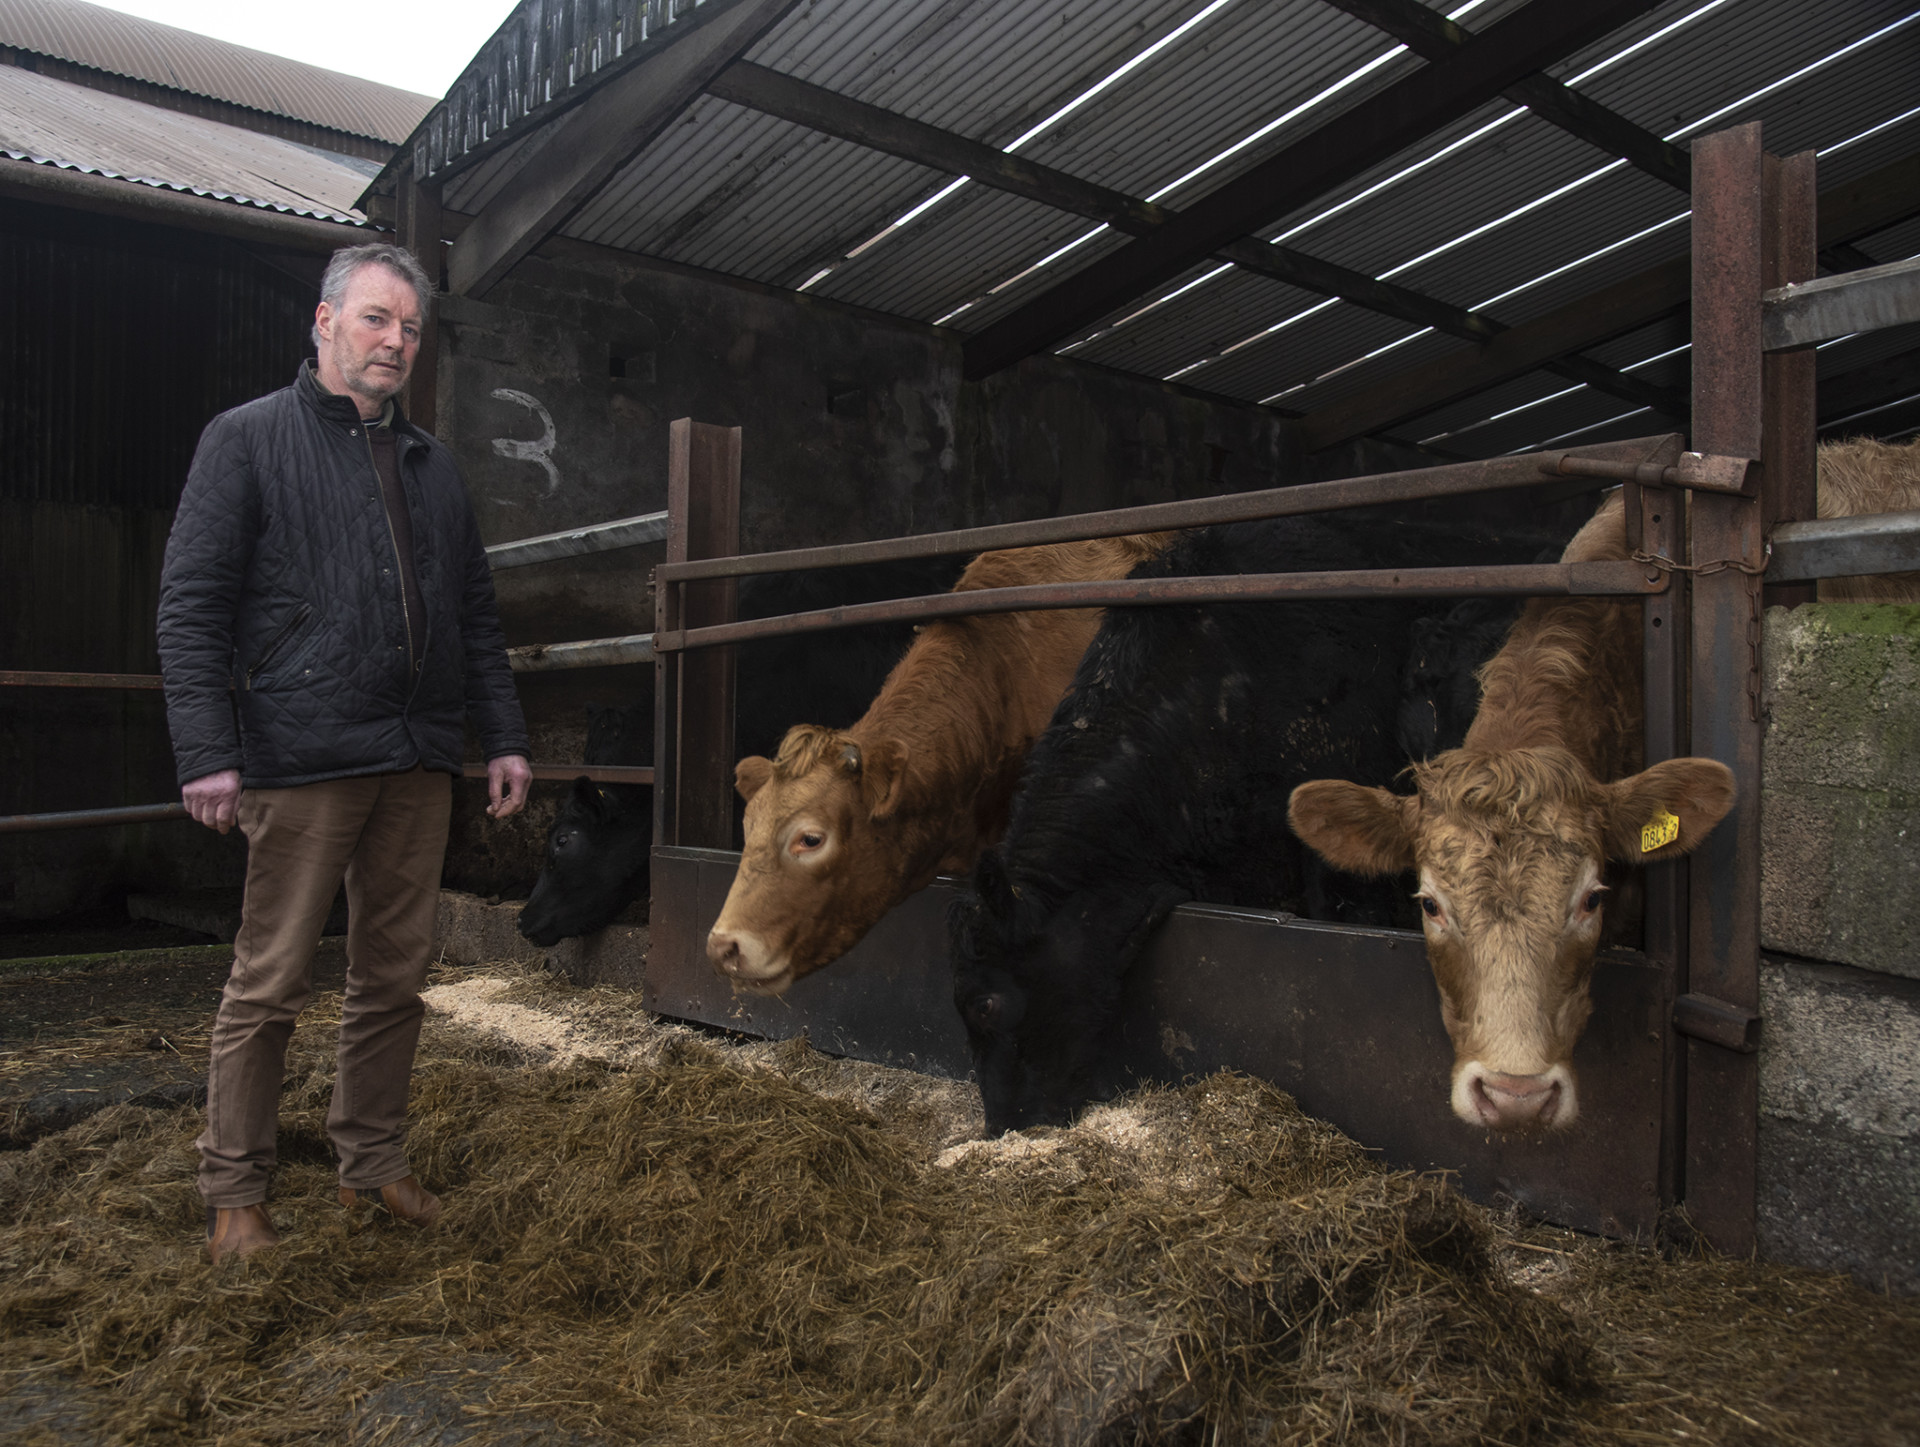 Farmer fears for next generation in the industry amid tough climate targets